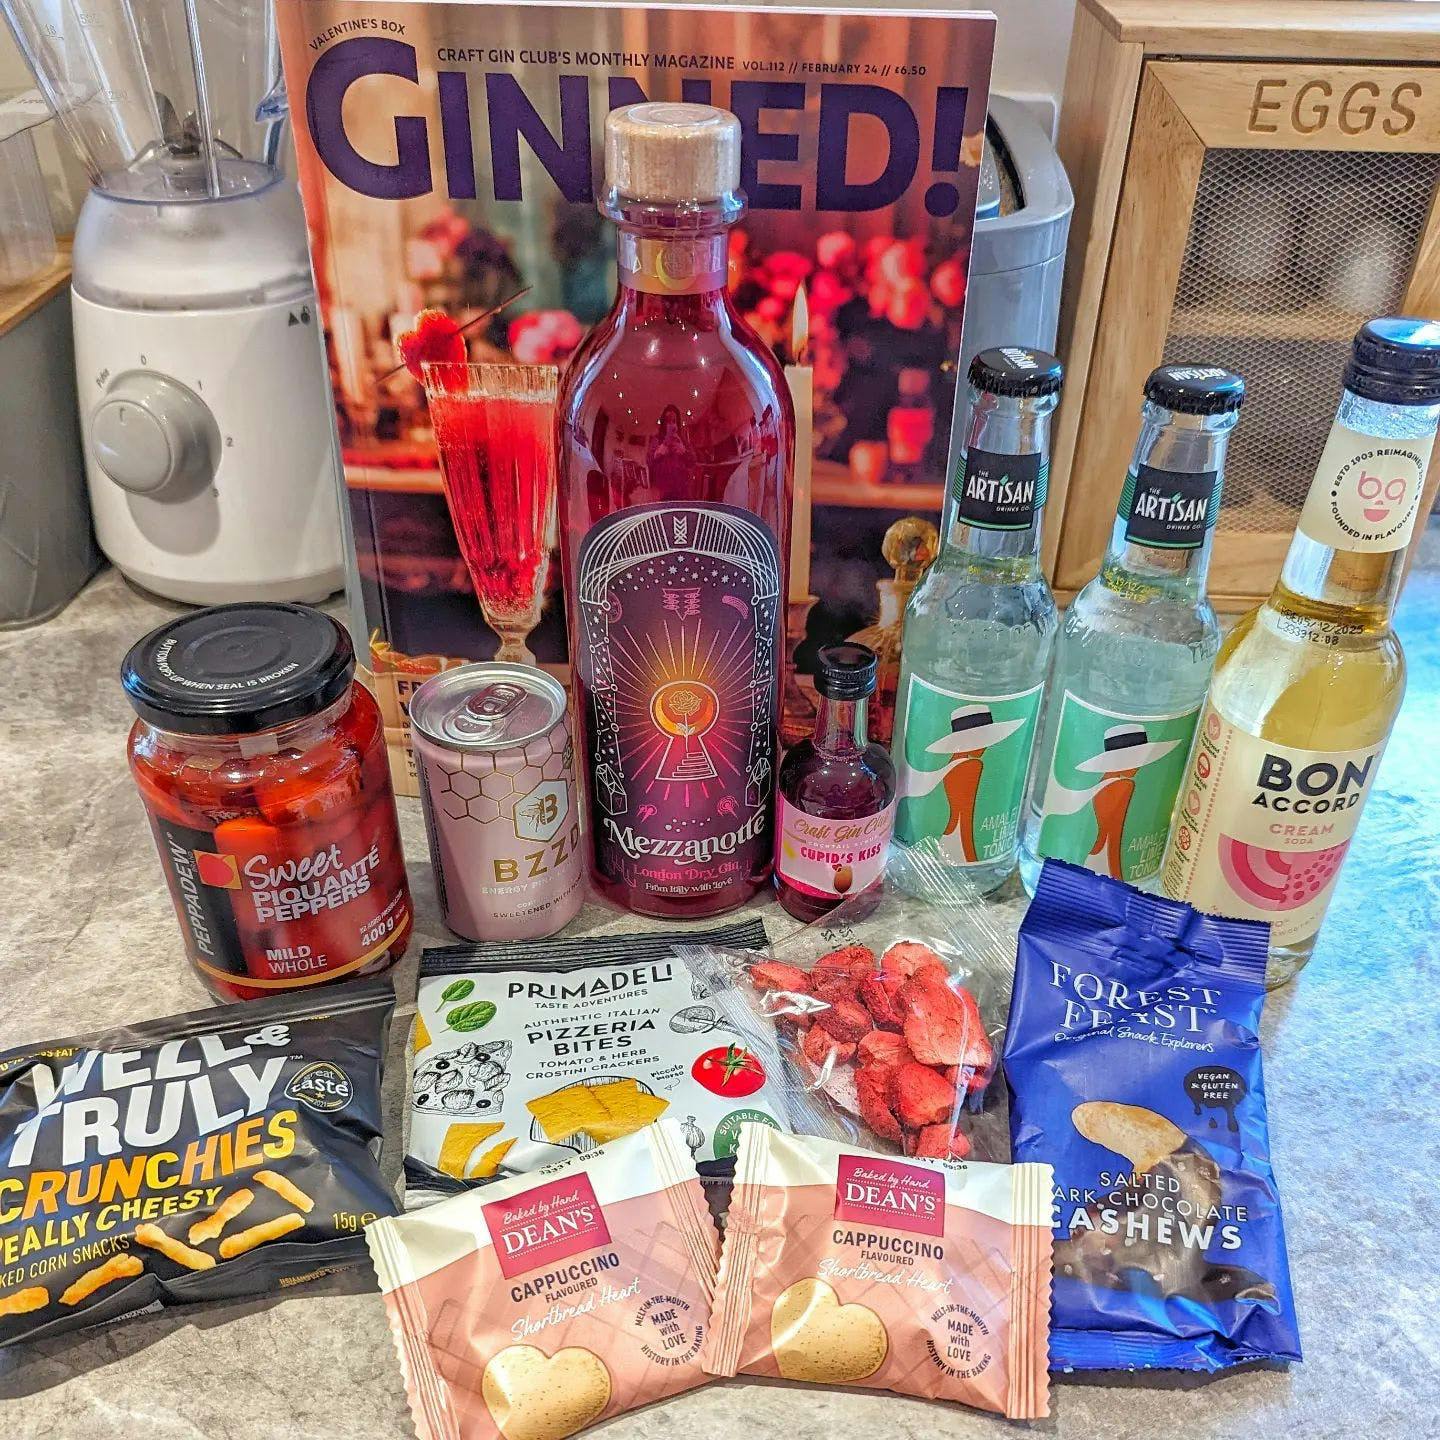 Contents of Mezzanotte gin box in a kitchen by @lianne_eleanor_saad